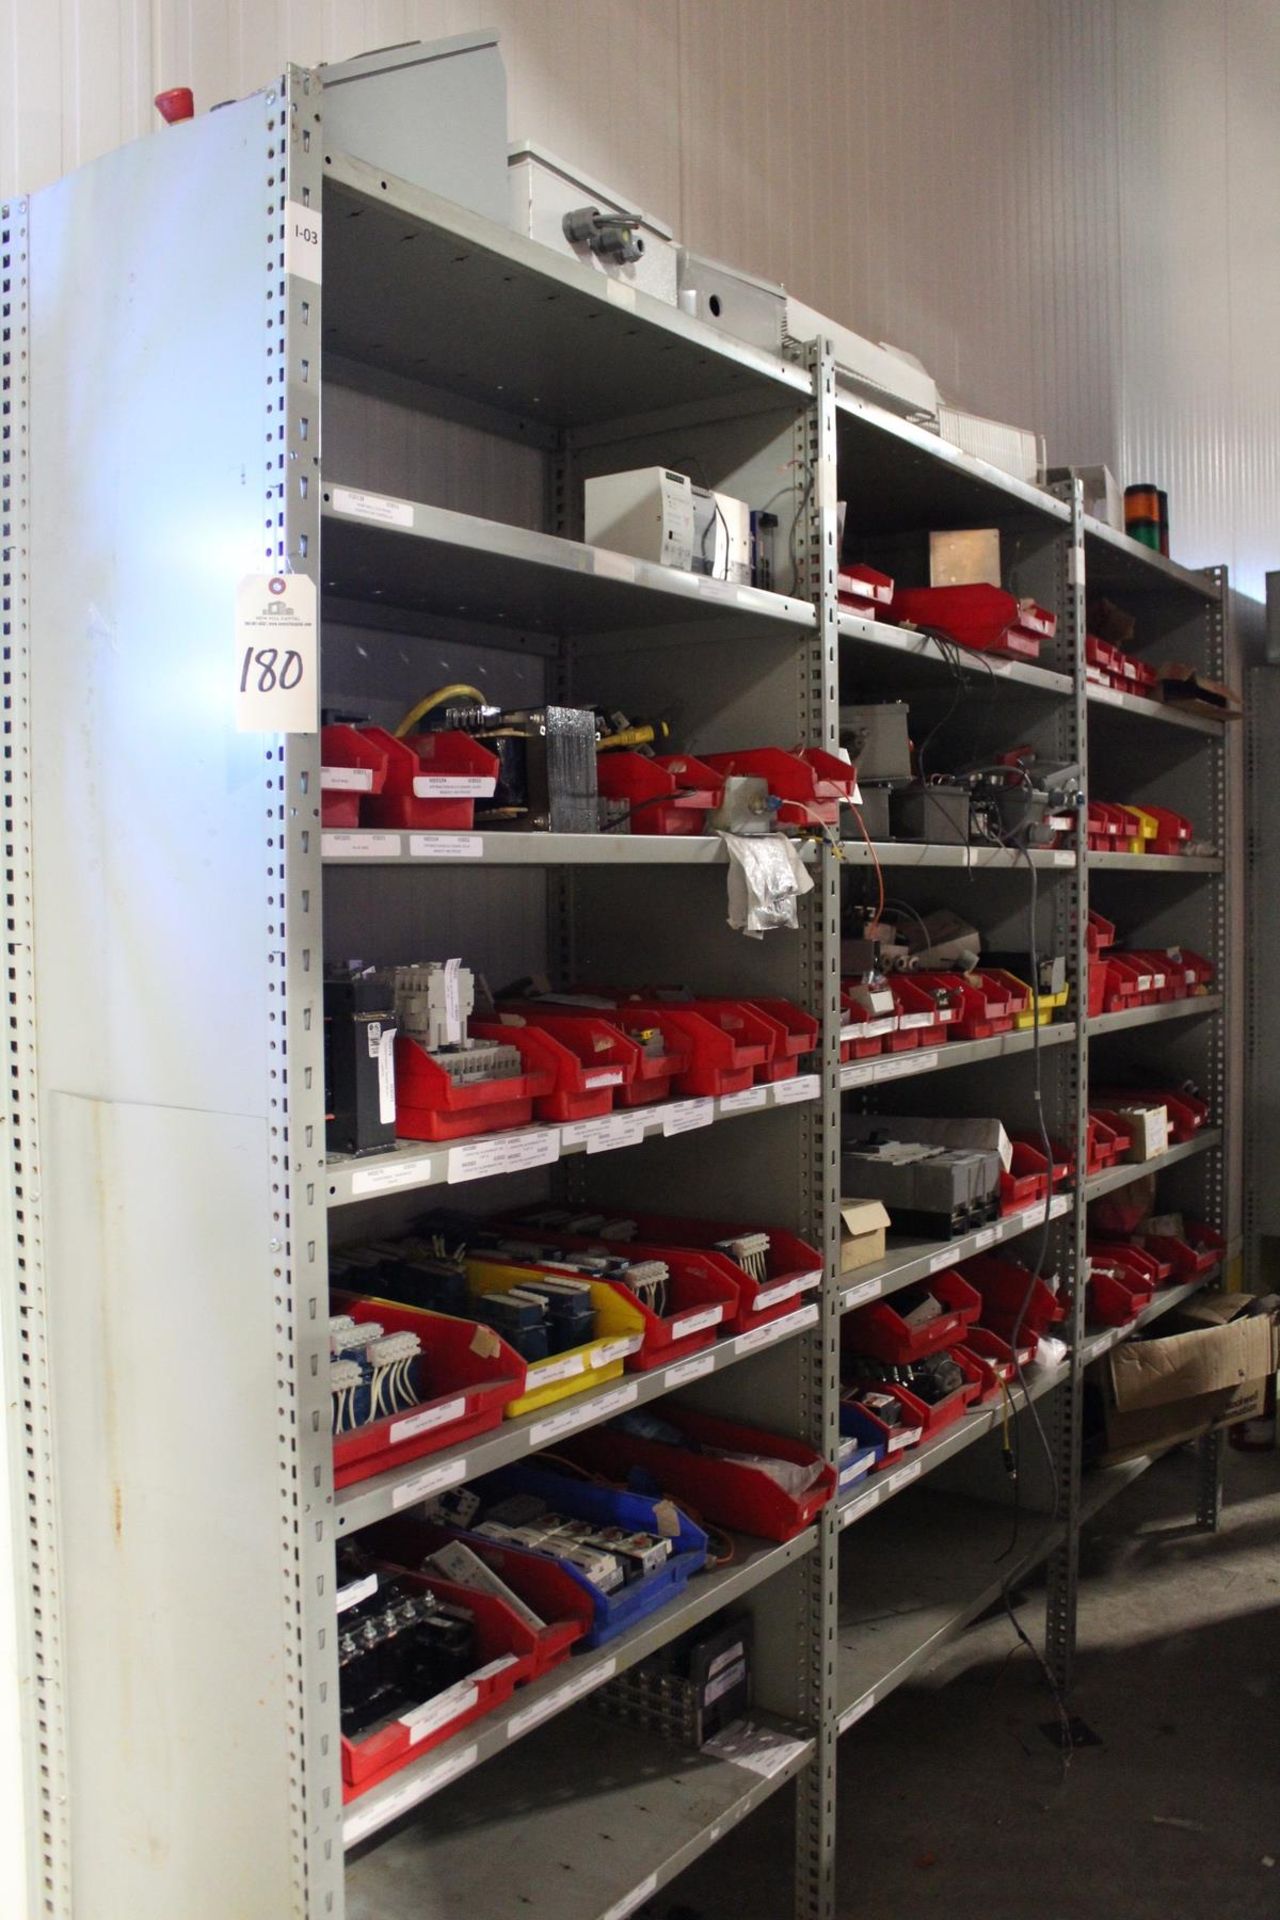 Contents of Storage Shelving, Electronic Components